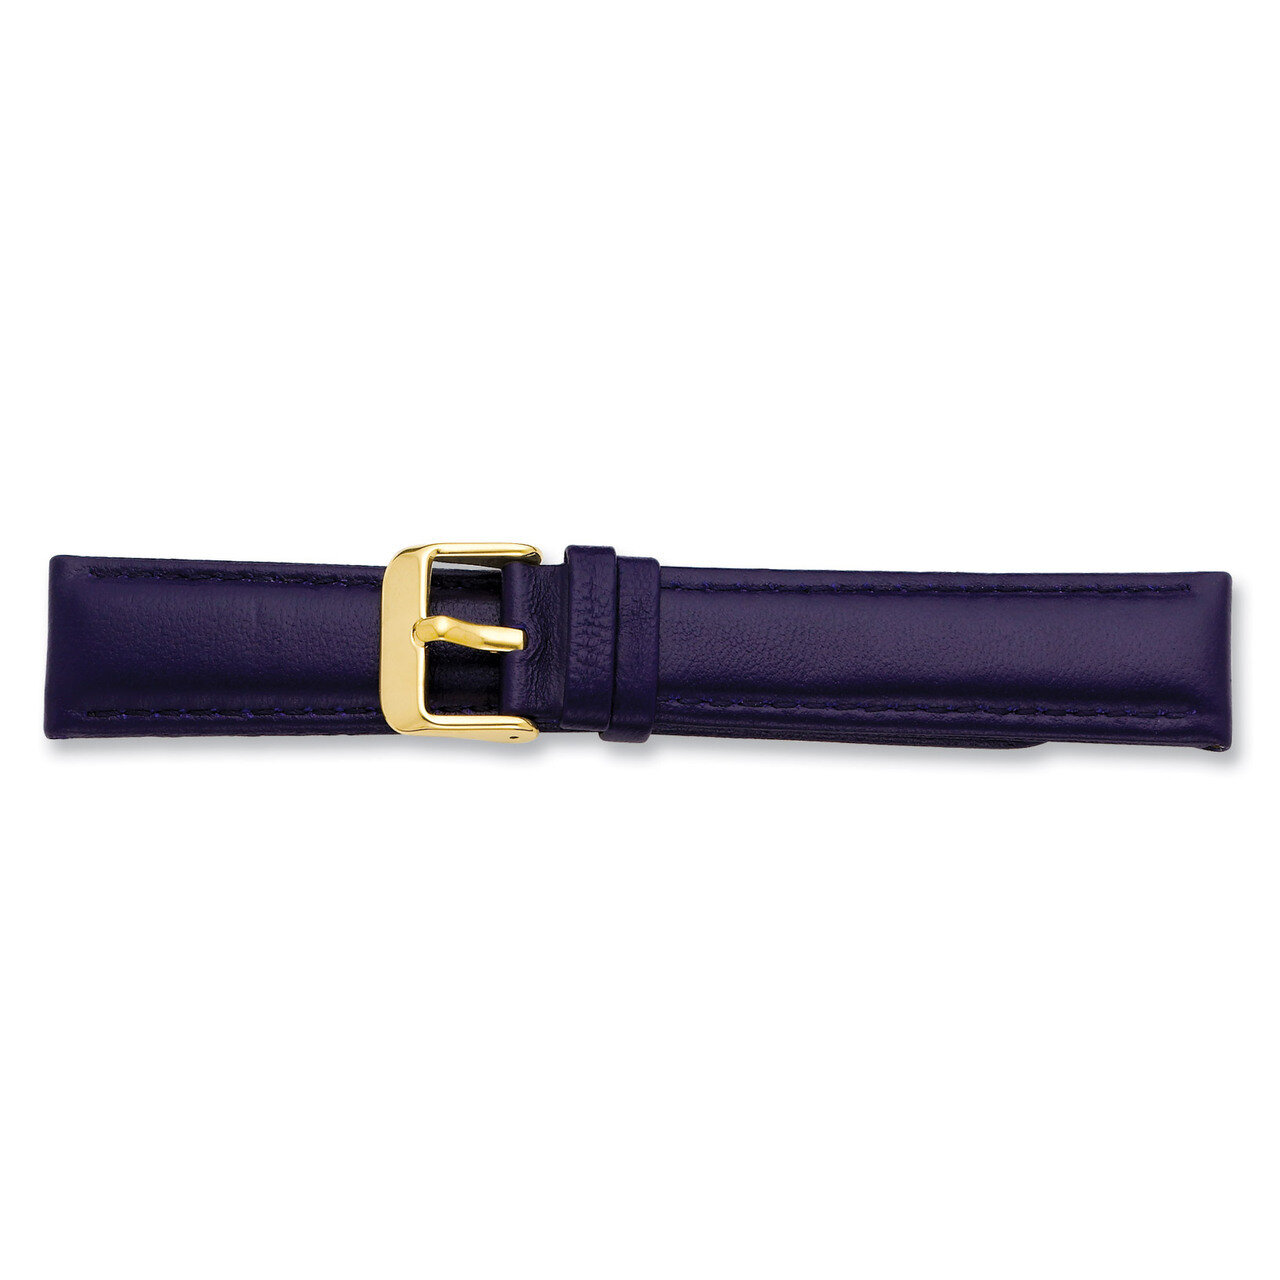 20mm Navy Glove Leather Buckle Watch Band 7.75 Inch Gold-tone BA198-20